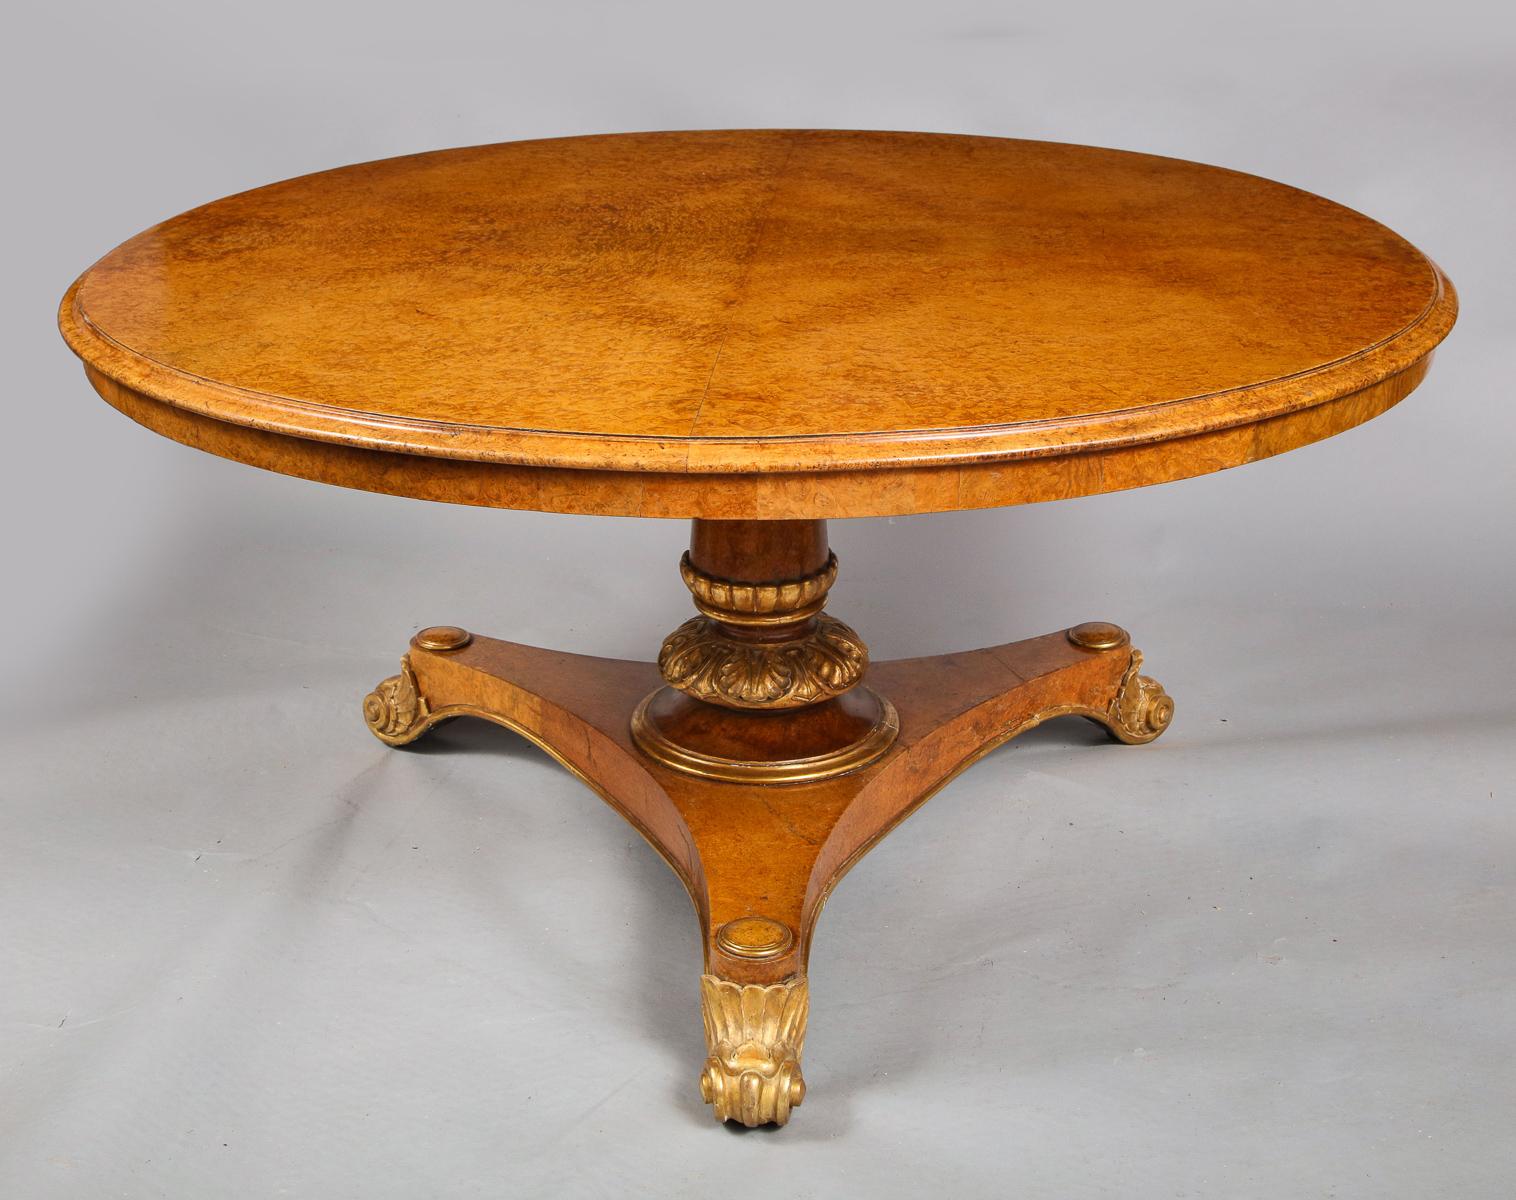 A very fine George IV amboyna burl and giltwood center table attributed to T. & G. Seddon (formerly Morel and Seddon), circa 1835
The circular tilt-top with an ogee molded edge above a tapering turned, and acanthus-carved pedestal and a